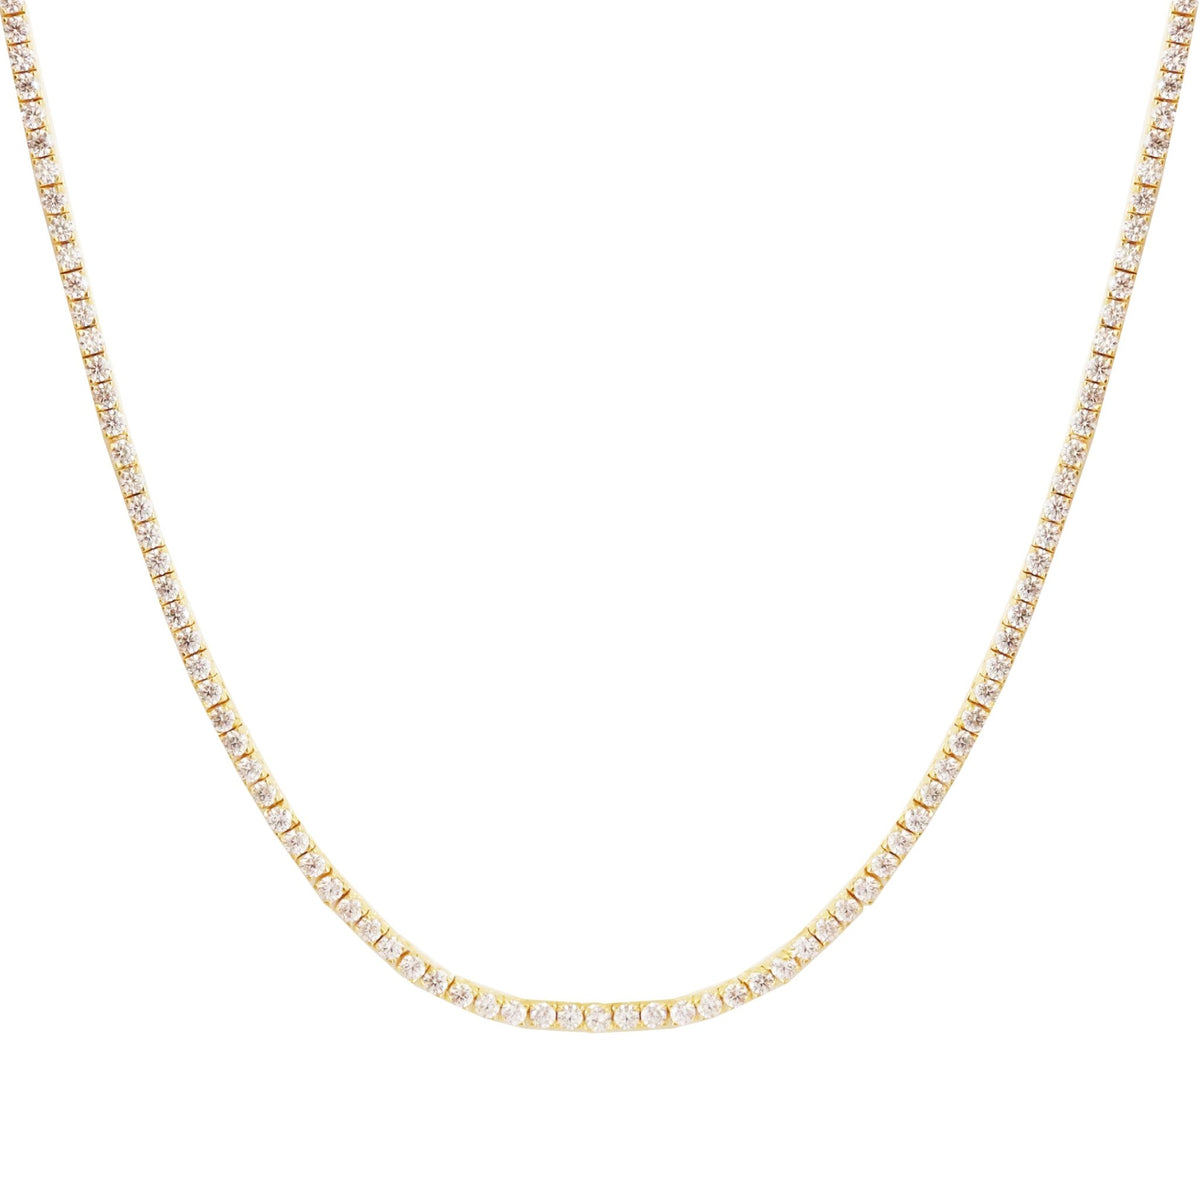 LOVE TENNIS NECKLACE - CUBIC ZIRCONIA &amp; GOLD - SO PRETTY CARA COTTER